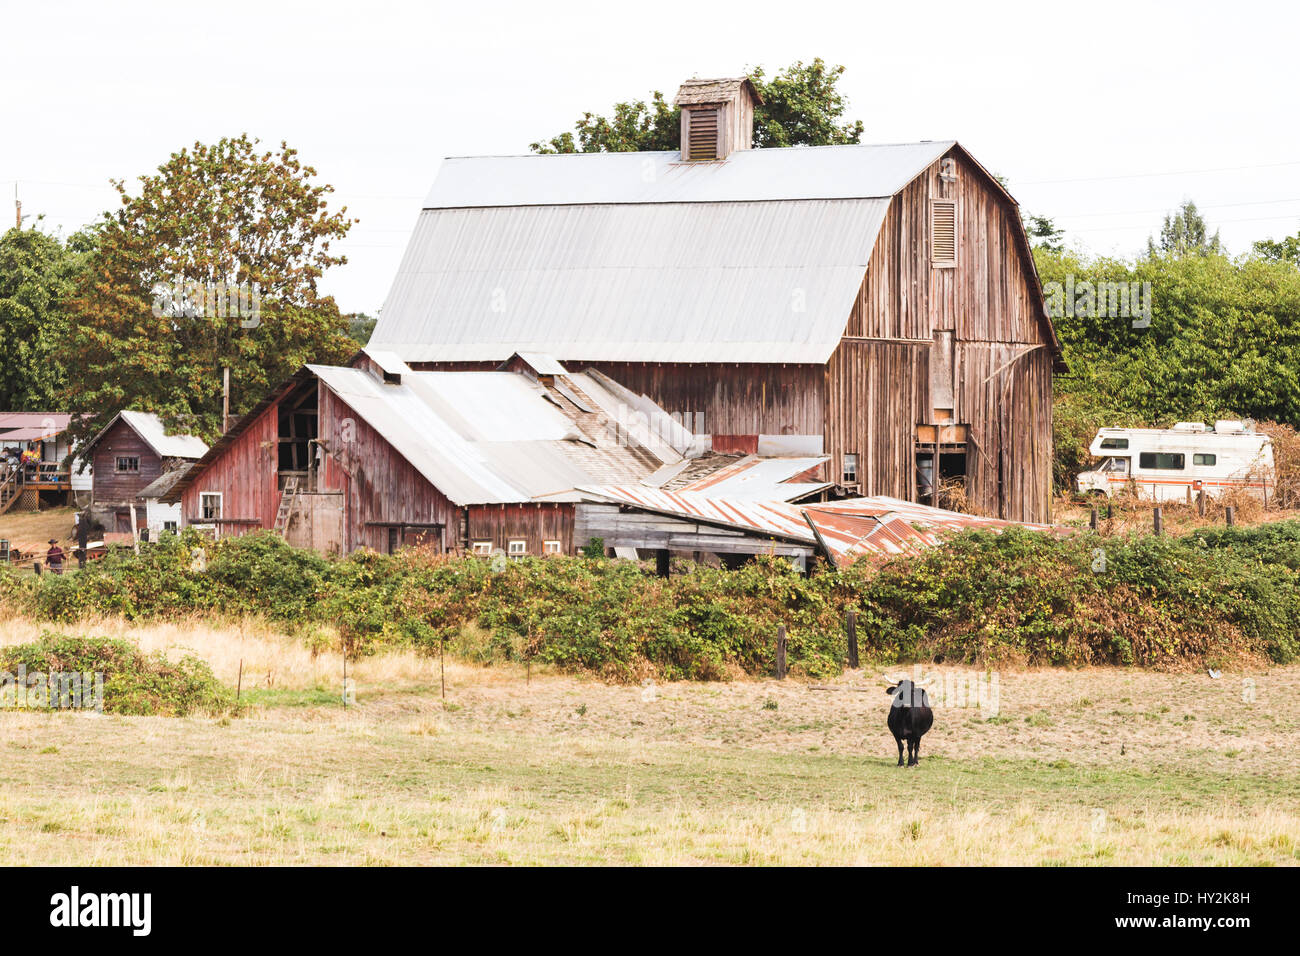 Wooden and metal farm house with a black bull standing nearby. Stock Photo